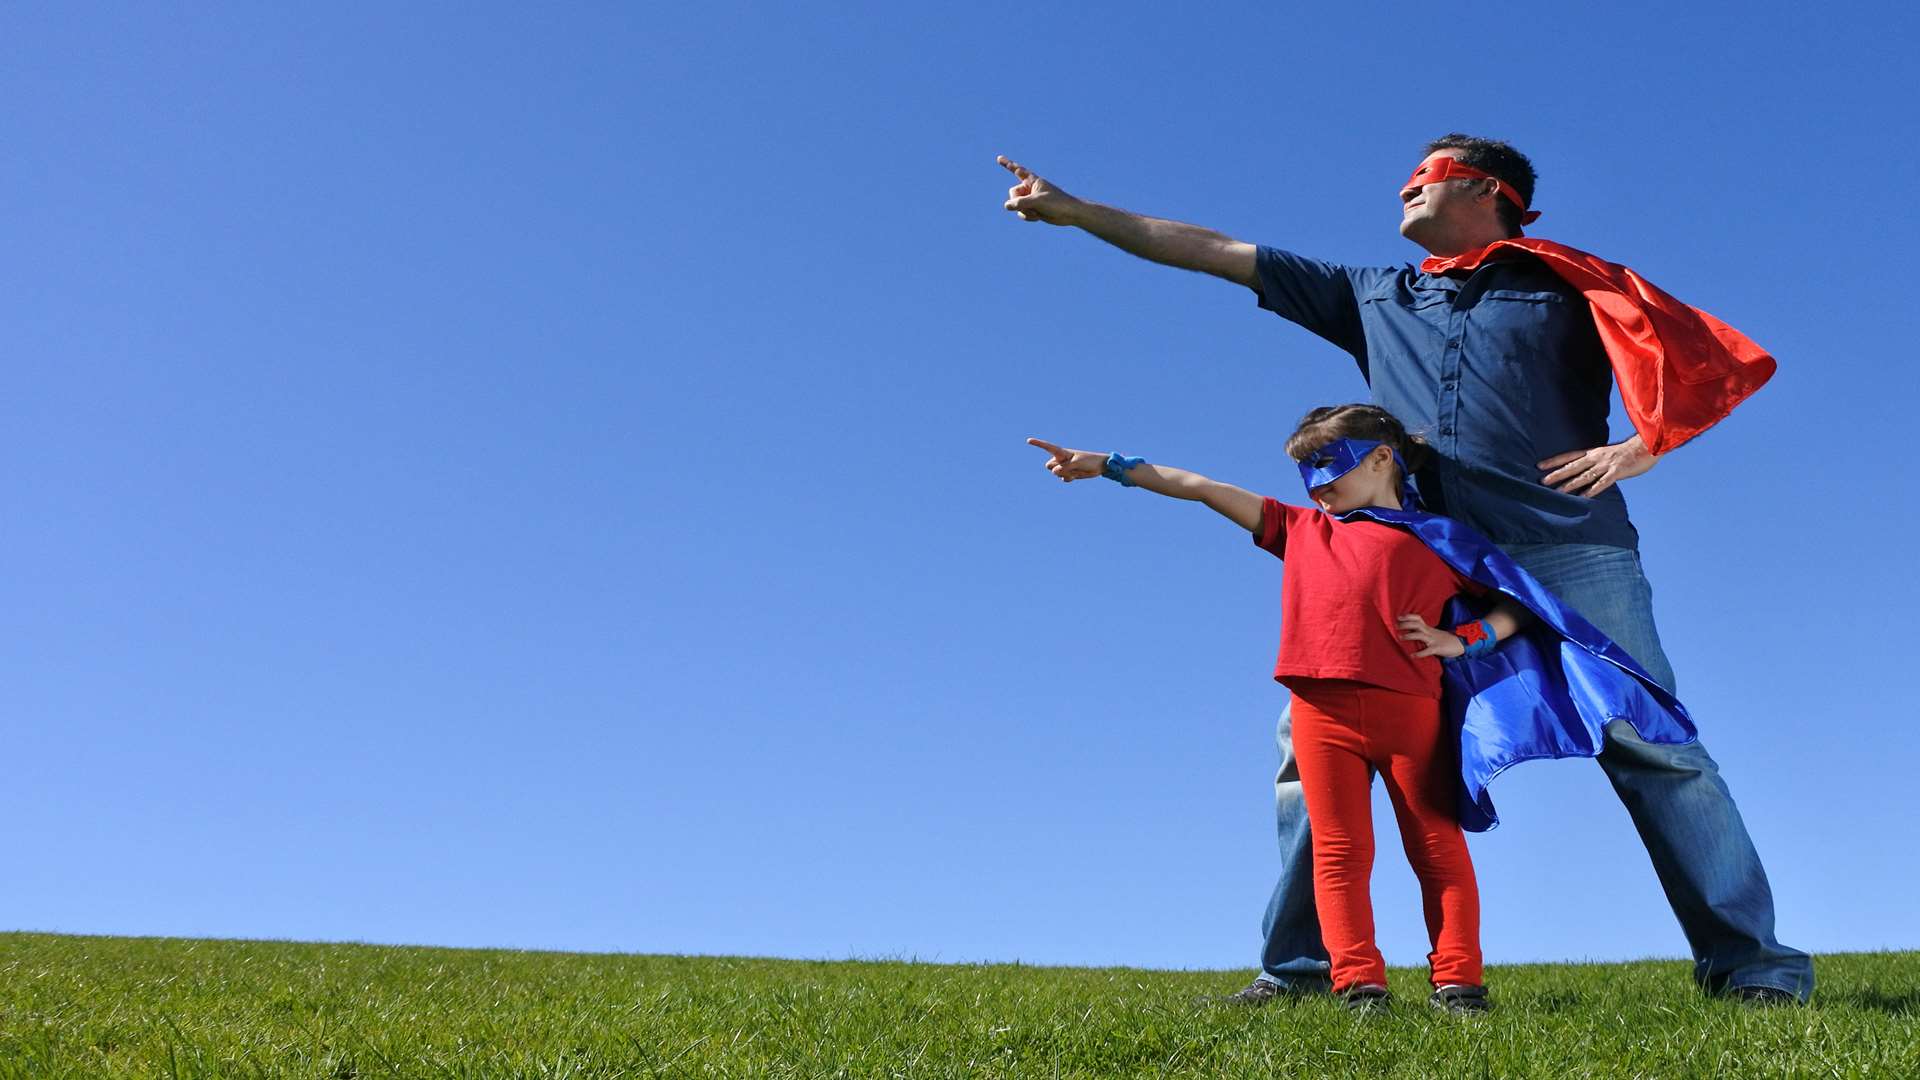 Sixty percent of children believe their dad is capable of inhuman feats of strength.